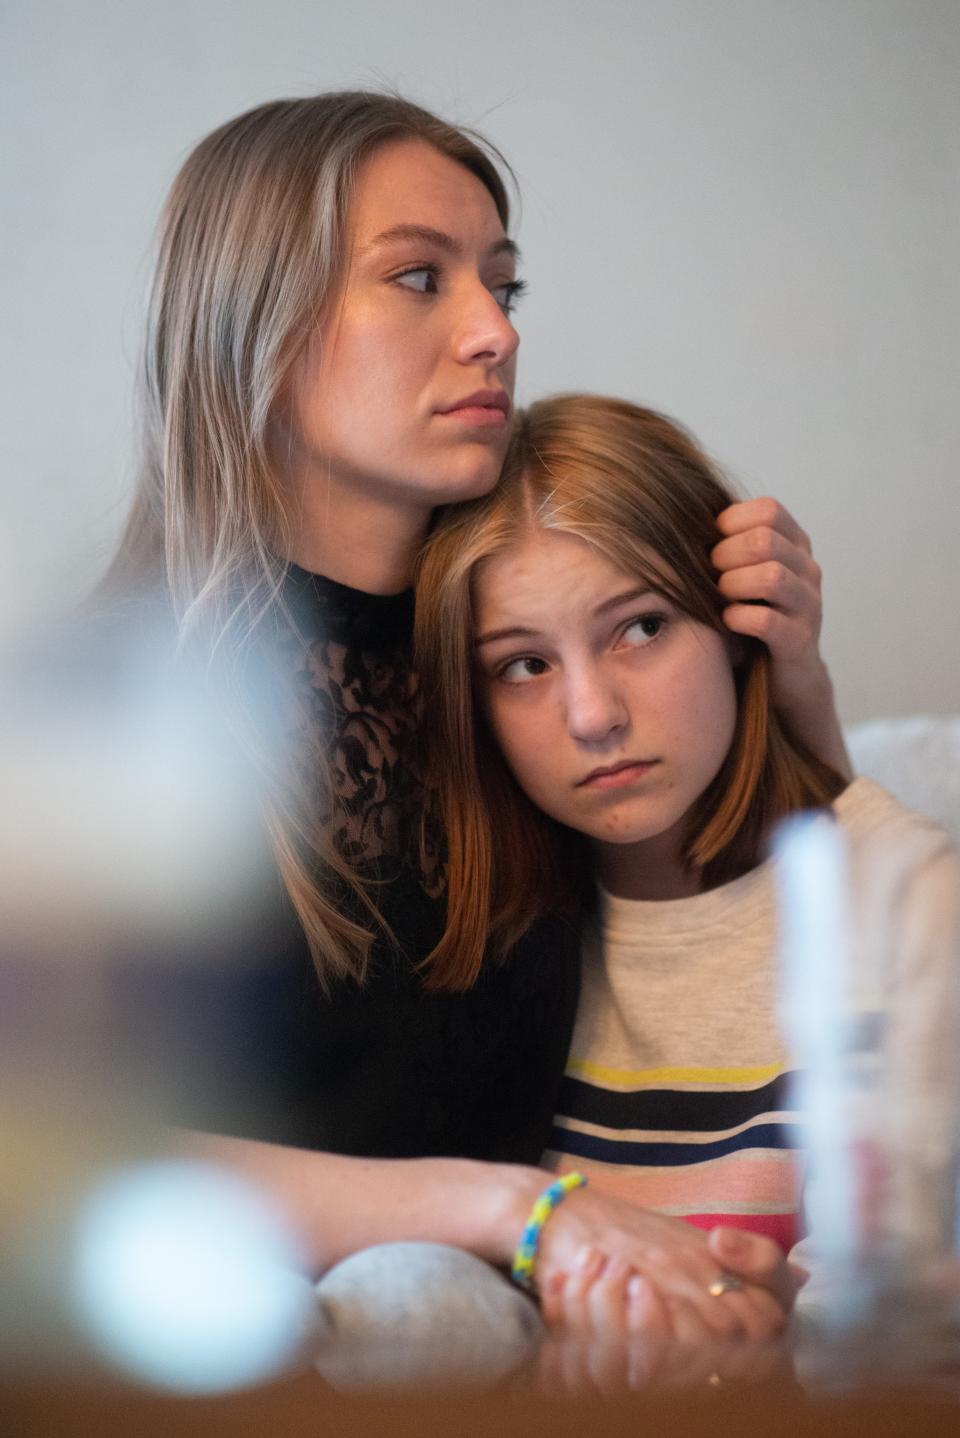 In this photo vocalist Mariia Ratman, left, comforts her sister Daria Ratman shortly after fleeing Ukraine. Mariia Ratman, will perform in Ukrainian and English at a concert Sunday.